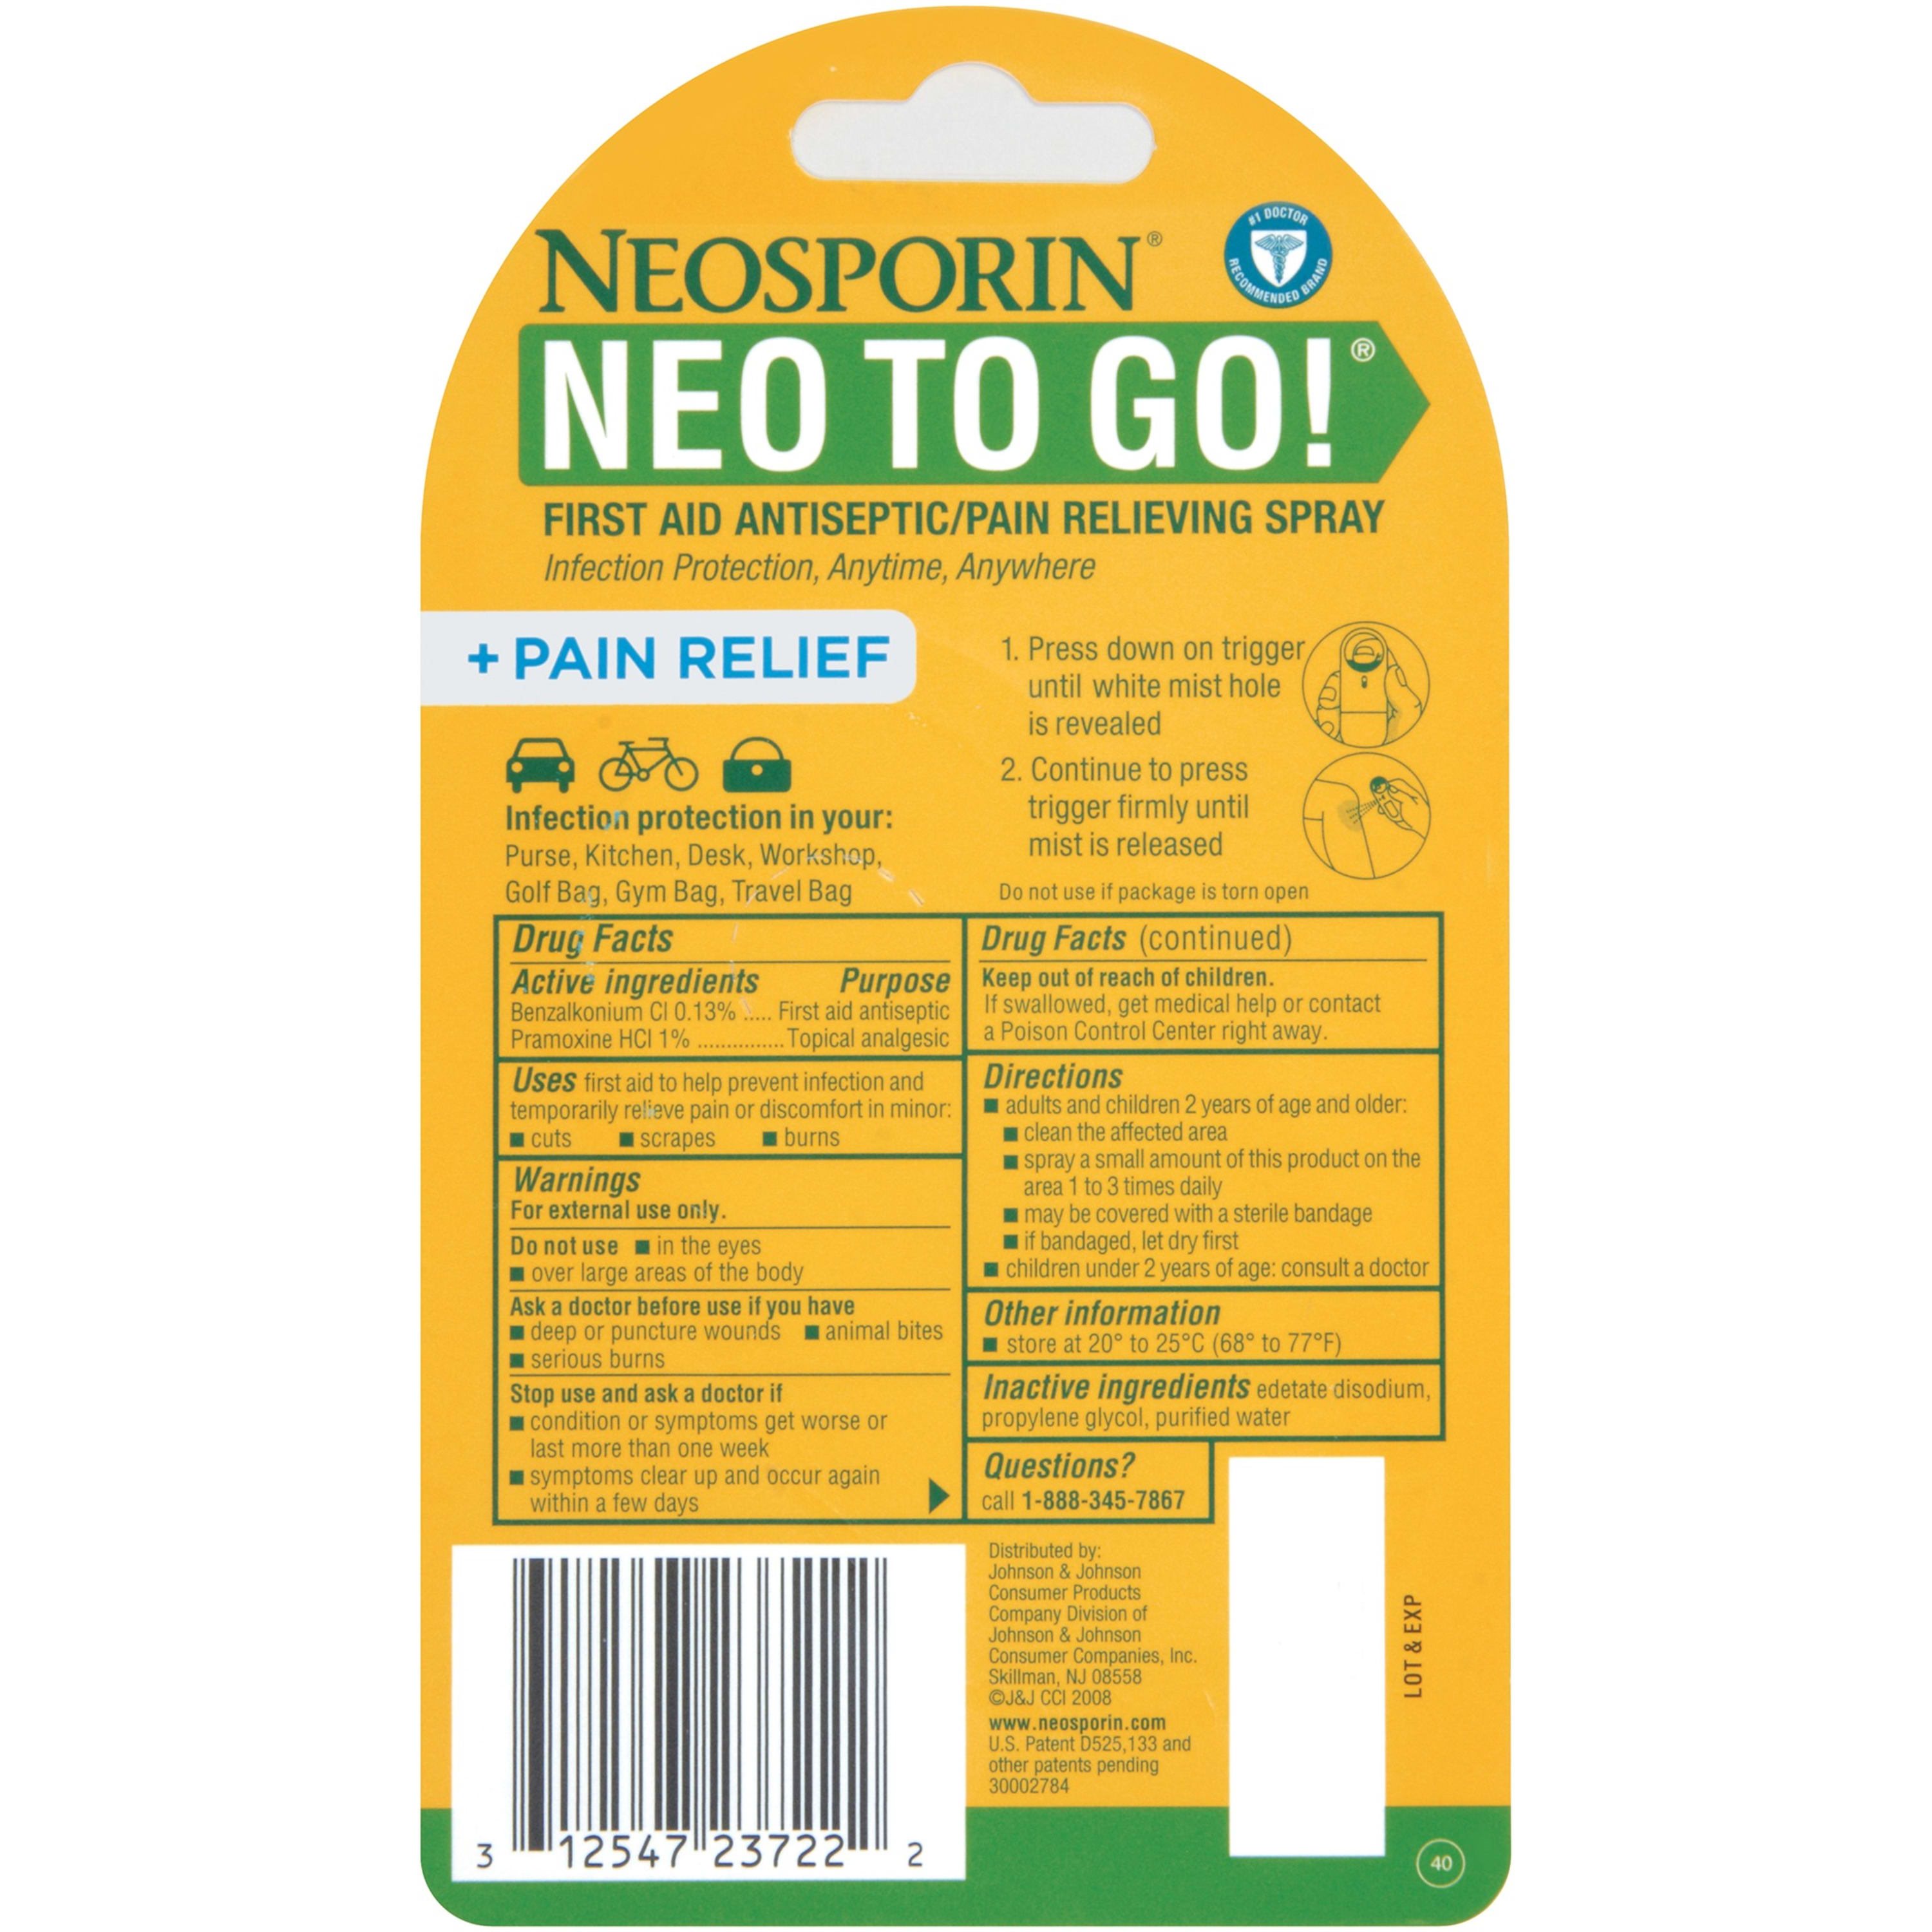 Neosporin + Pain Relief Neo To Go! First Aid Antiseptic/Pain Relieving Spray,.26 Oz - image 5 of 9